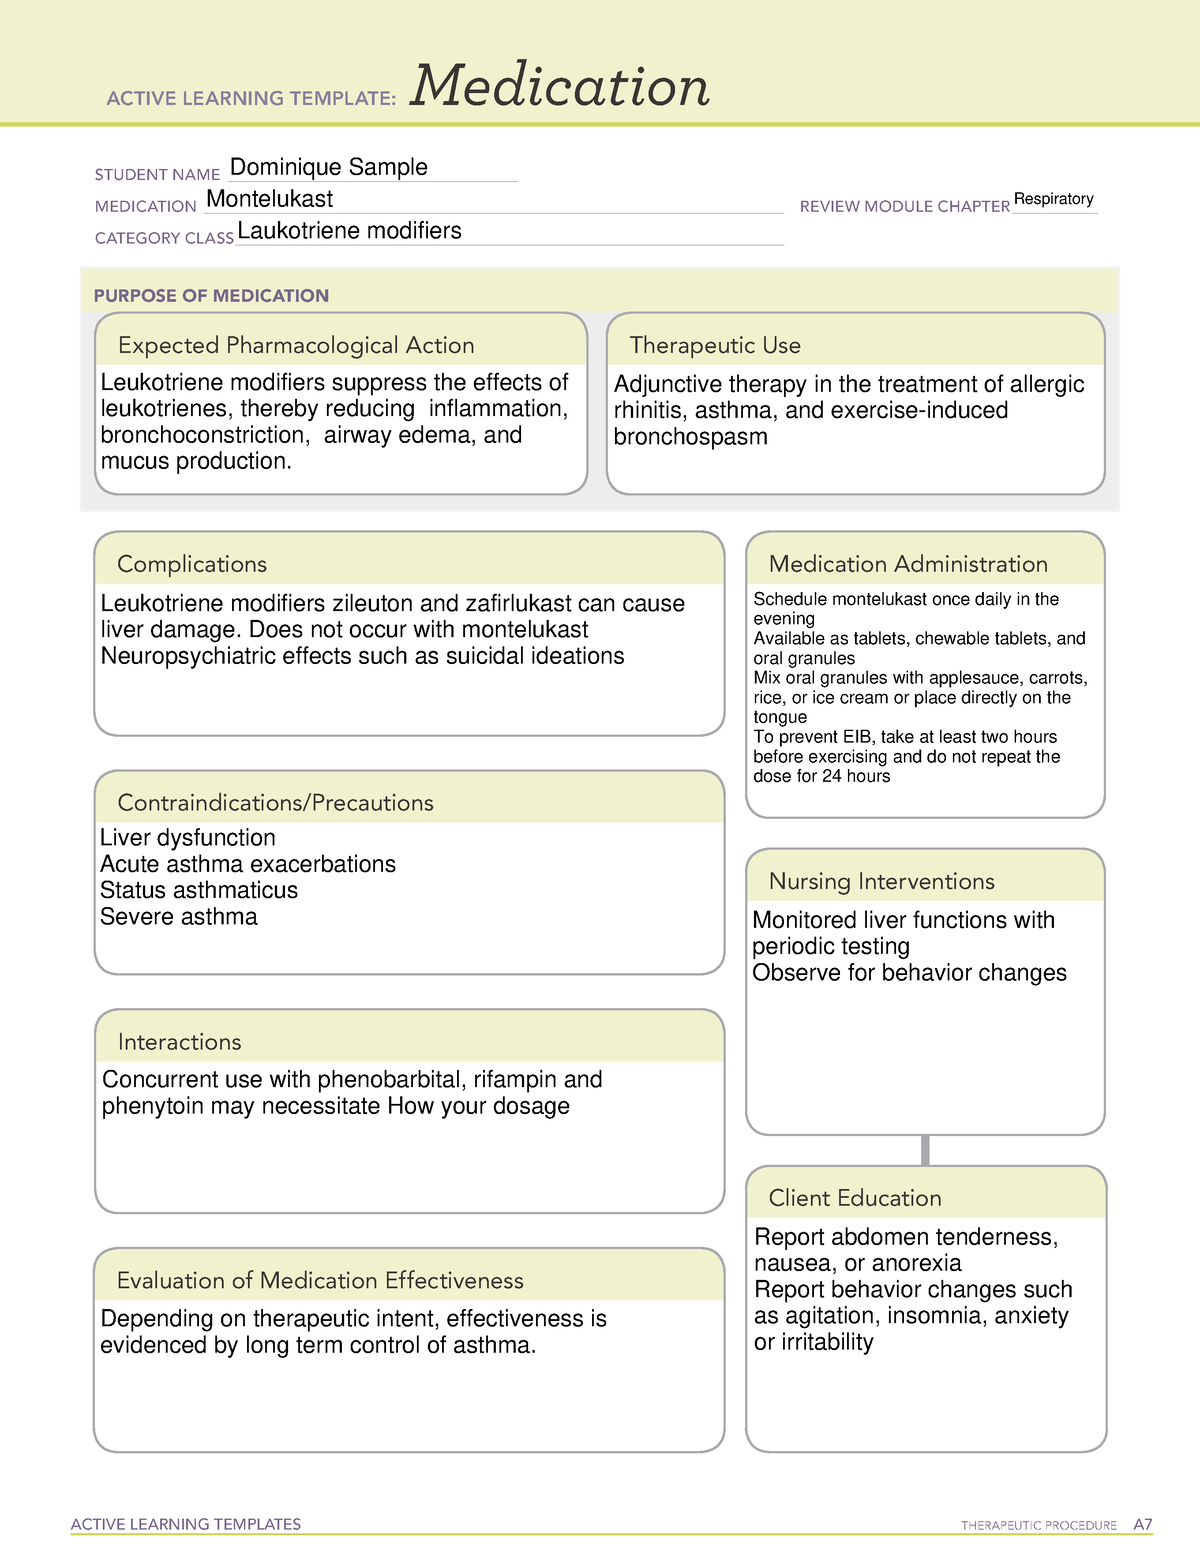 Montelukast Active Learning Template ACTIVE LEARNING TEMPLATES